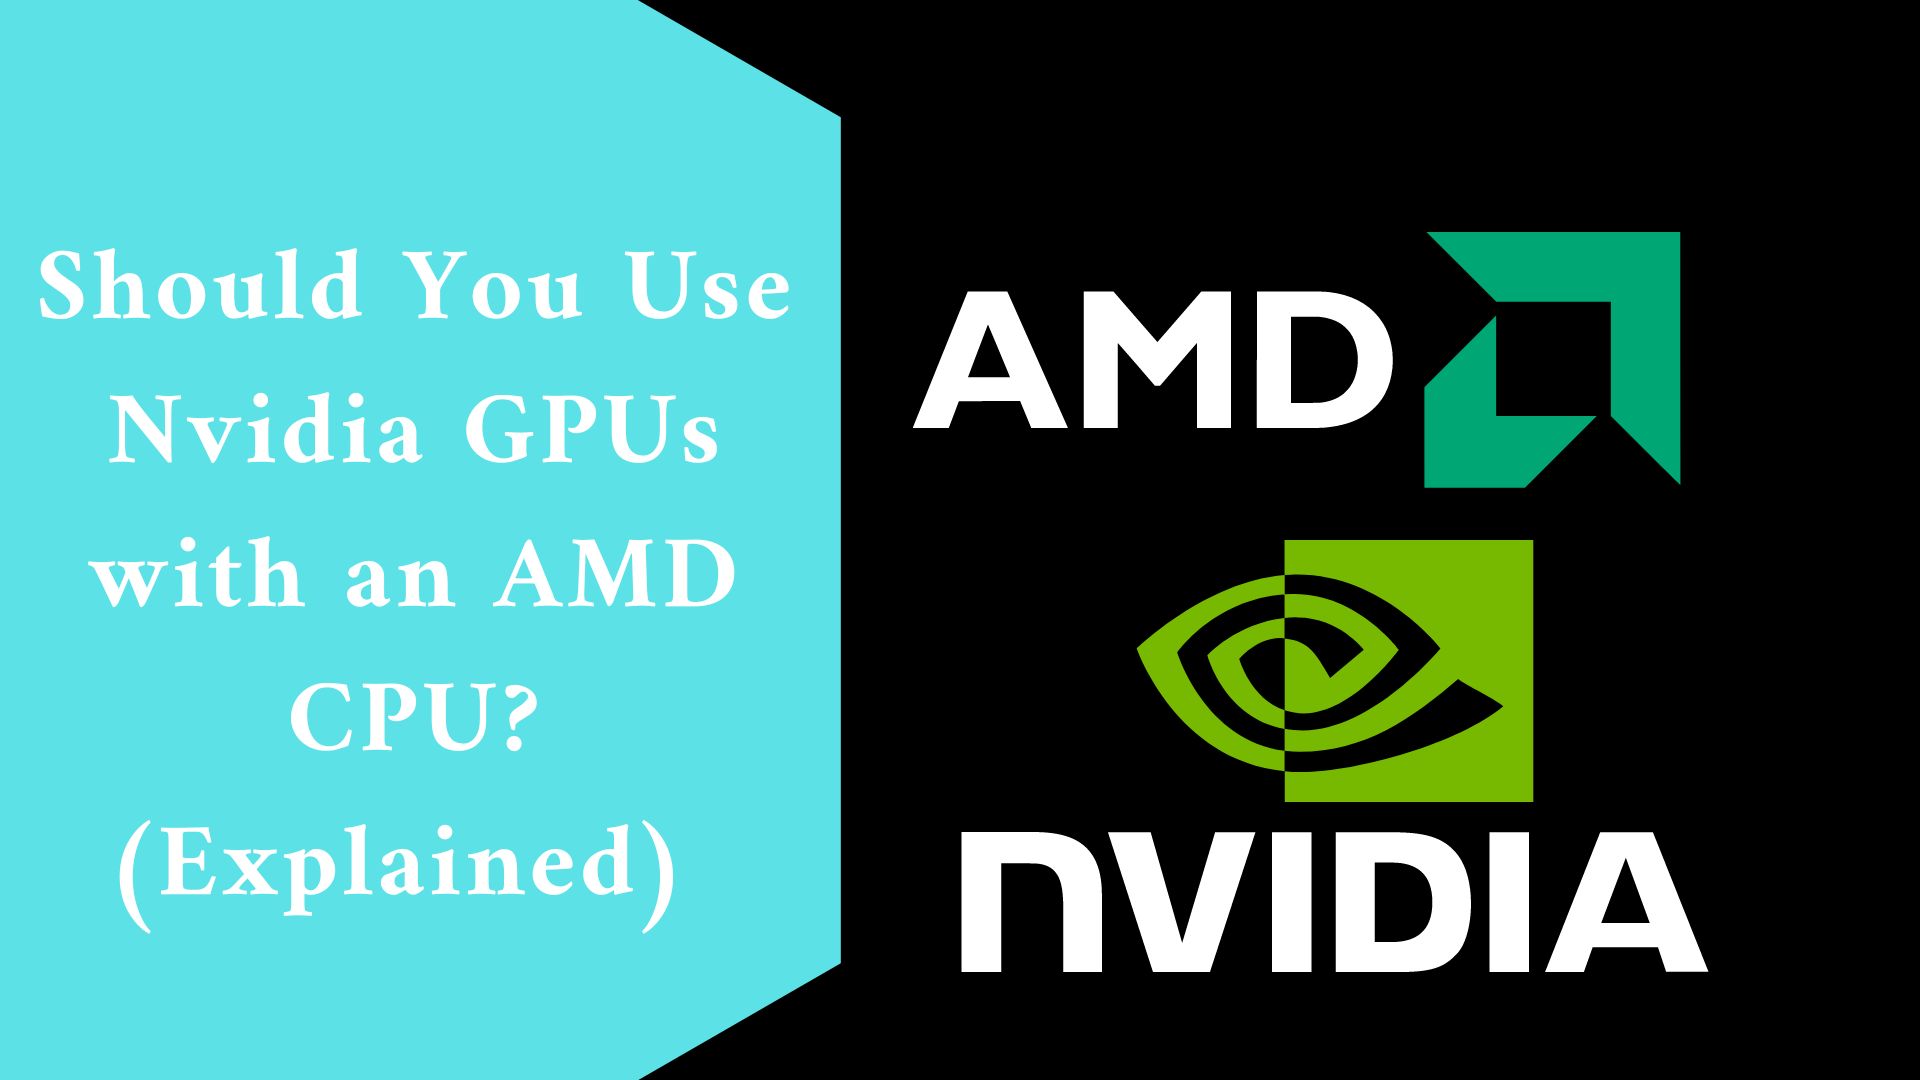 Should You Use Nvidia GPUs with an AMD CPU? (Explained)